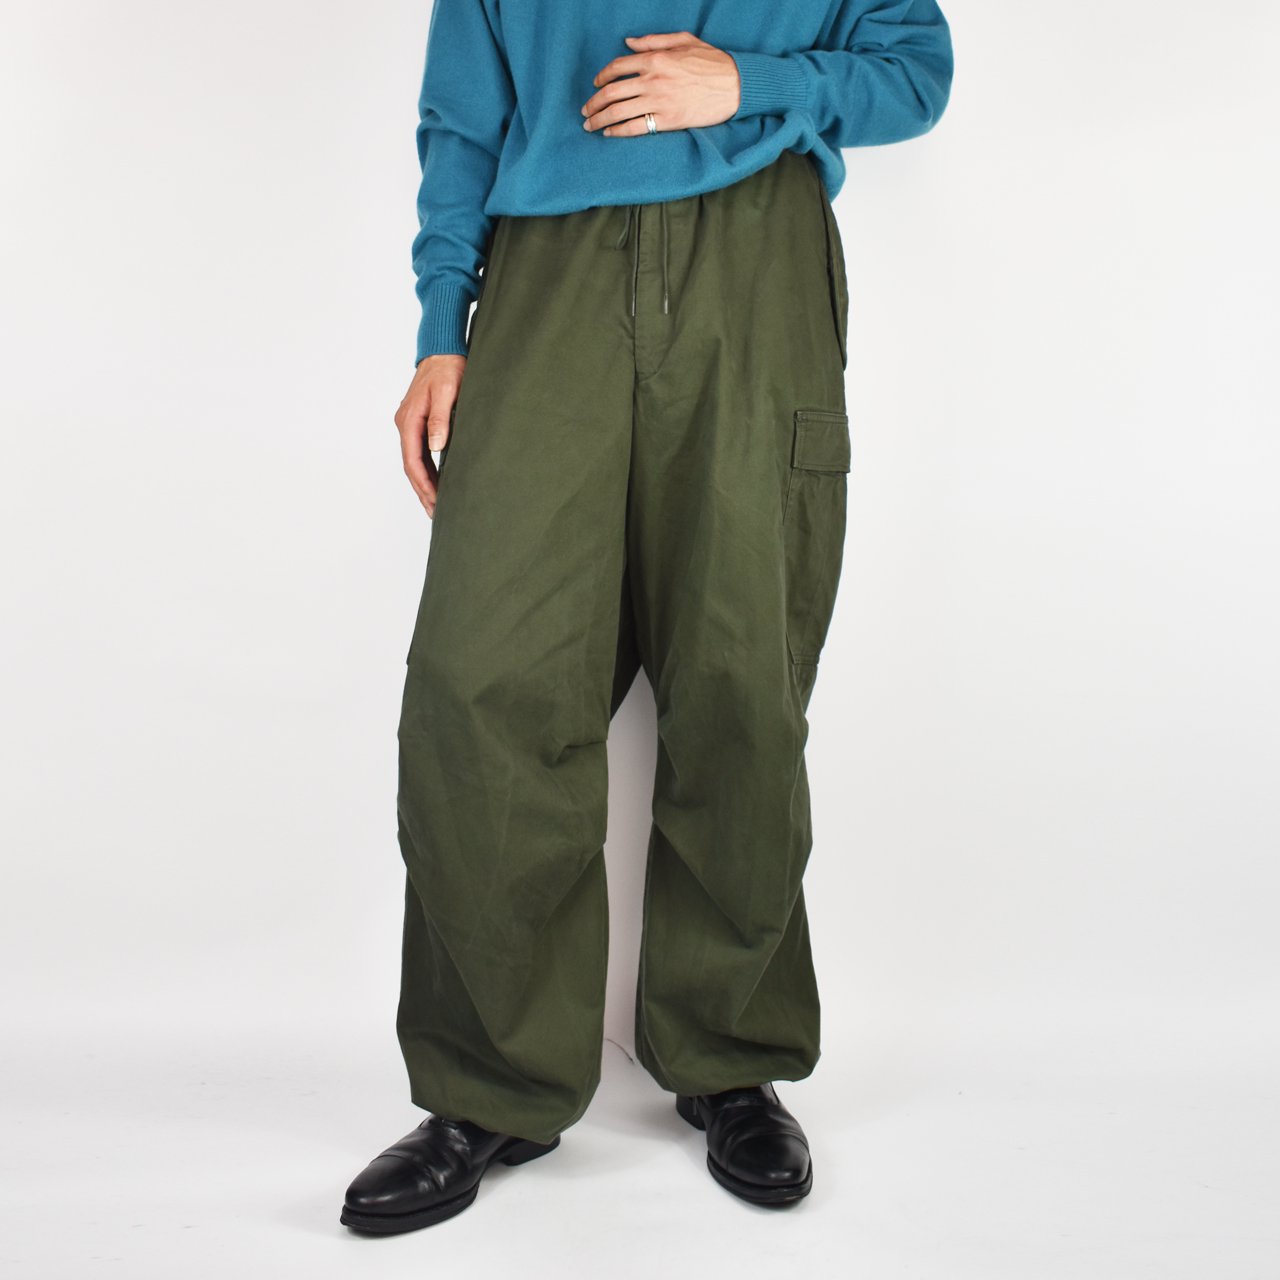 marka (マーカ)｜OVER PANTS OLIVE 正規取扱店 通販サイト